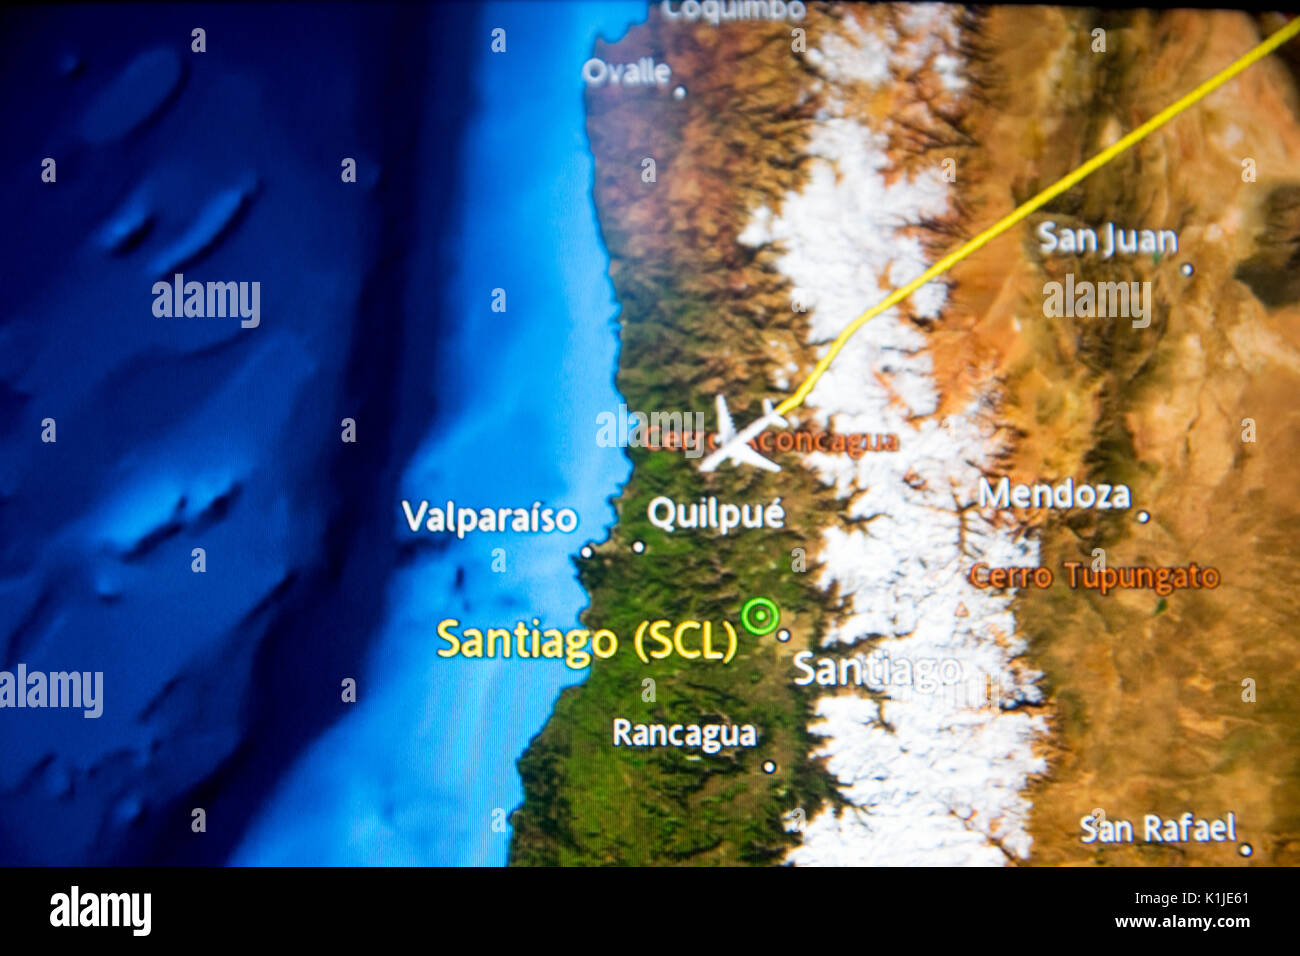 MADRID, SPAIN - JUNE 05, 2017: Detail of a digital map showing the trip from Madrid to Santiago de Chile in south america Stock Photo